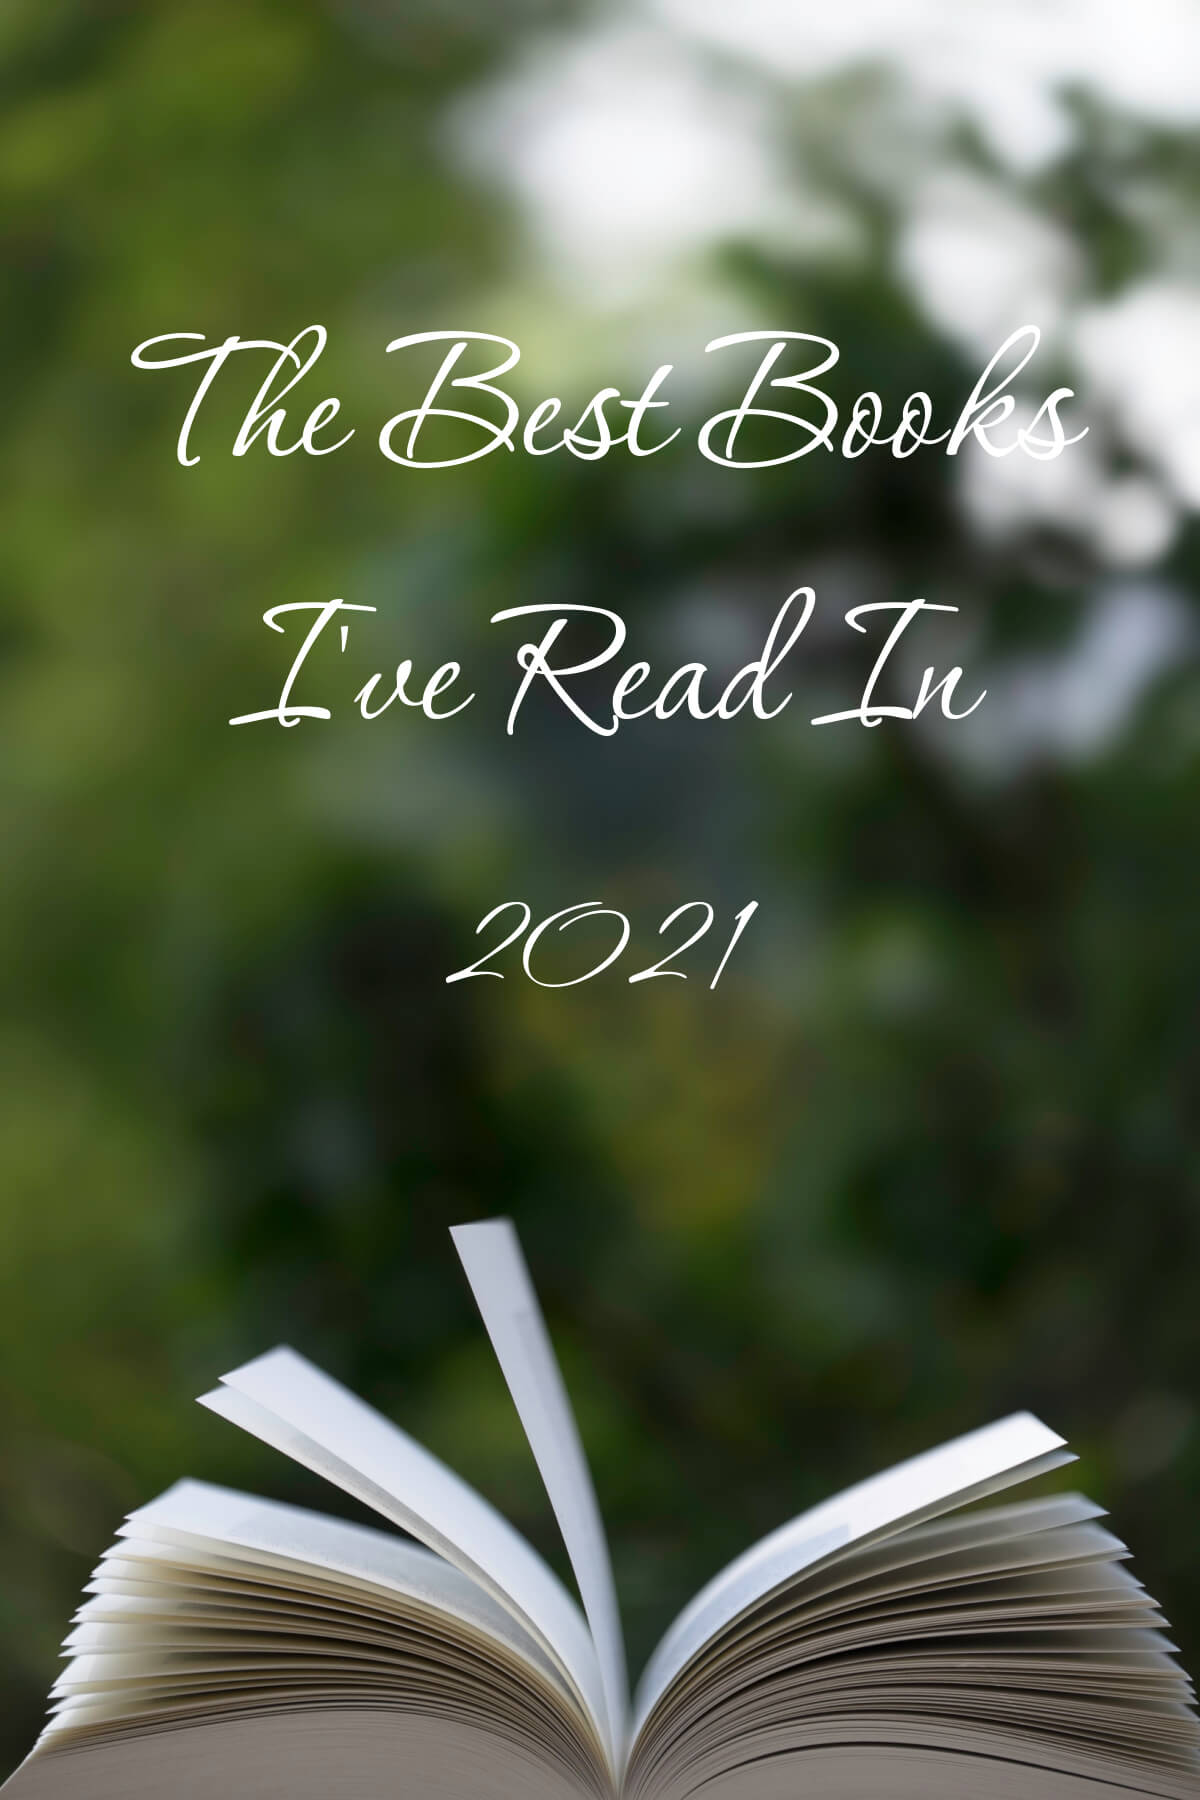 The Best Books I’ve Read In 2021